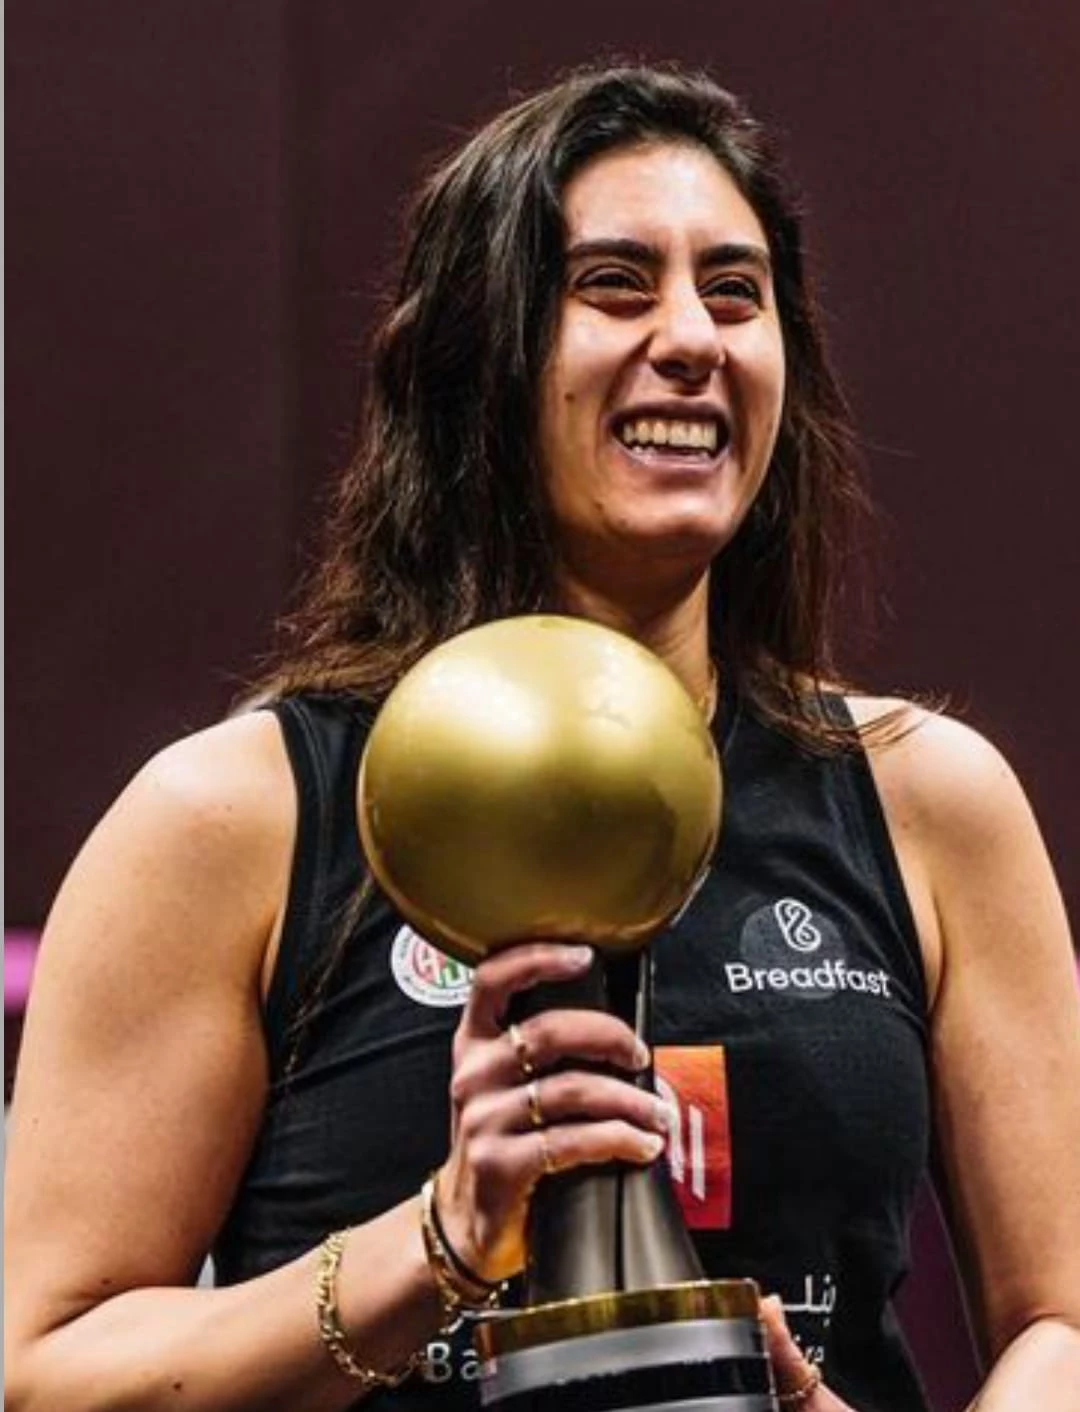 Queen Nour El Sherbini tops the women's squash world ranking for the 12th month in a row